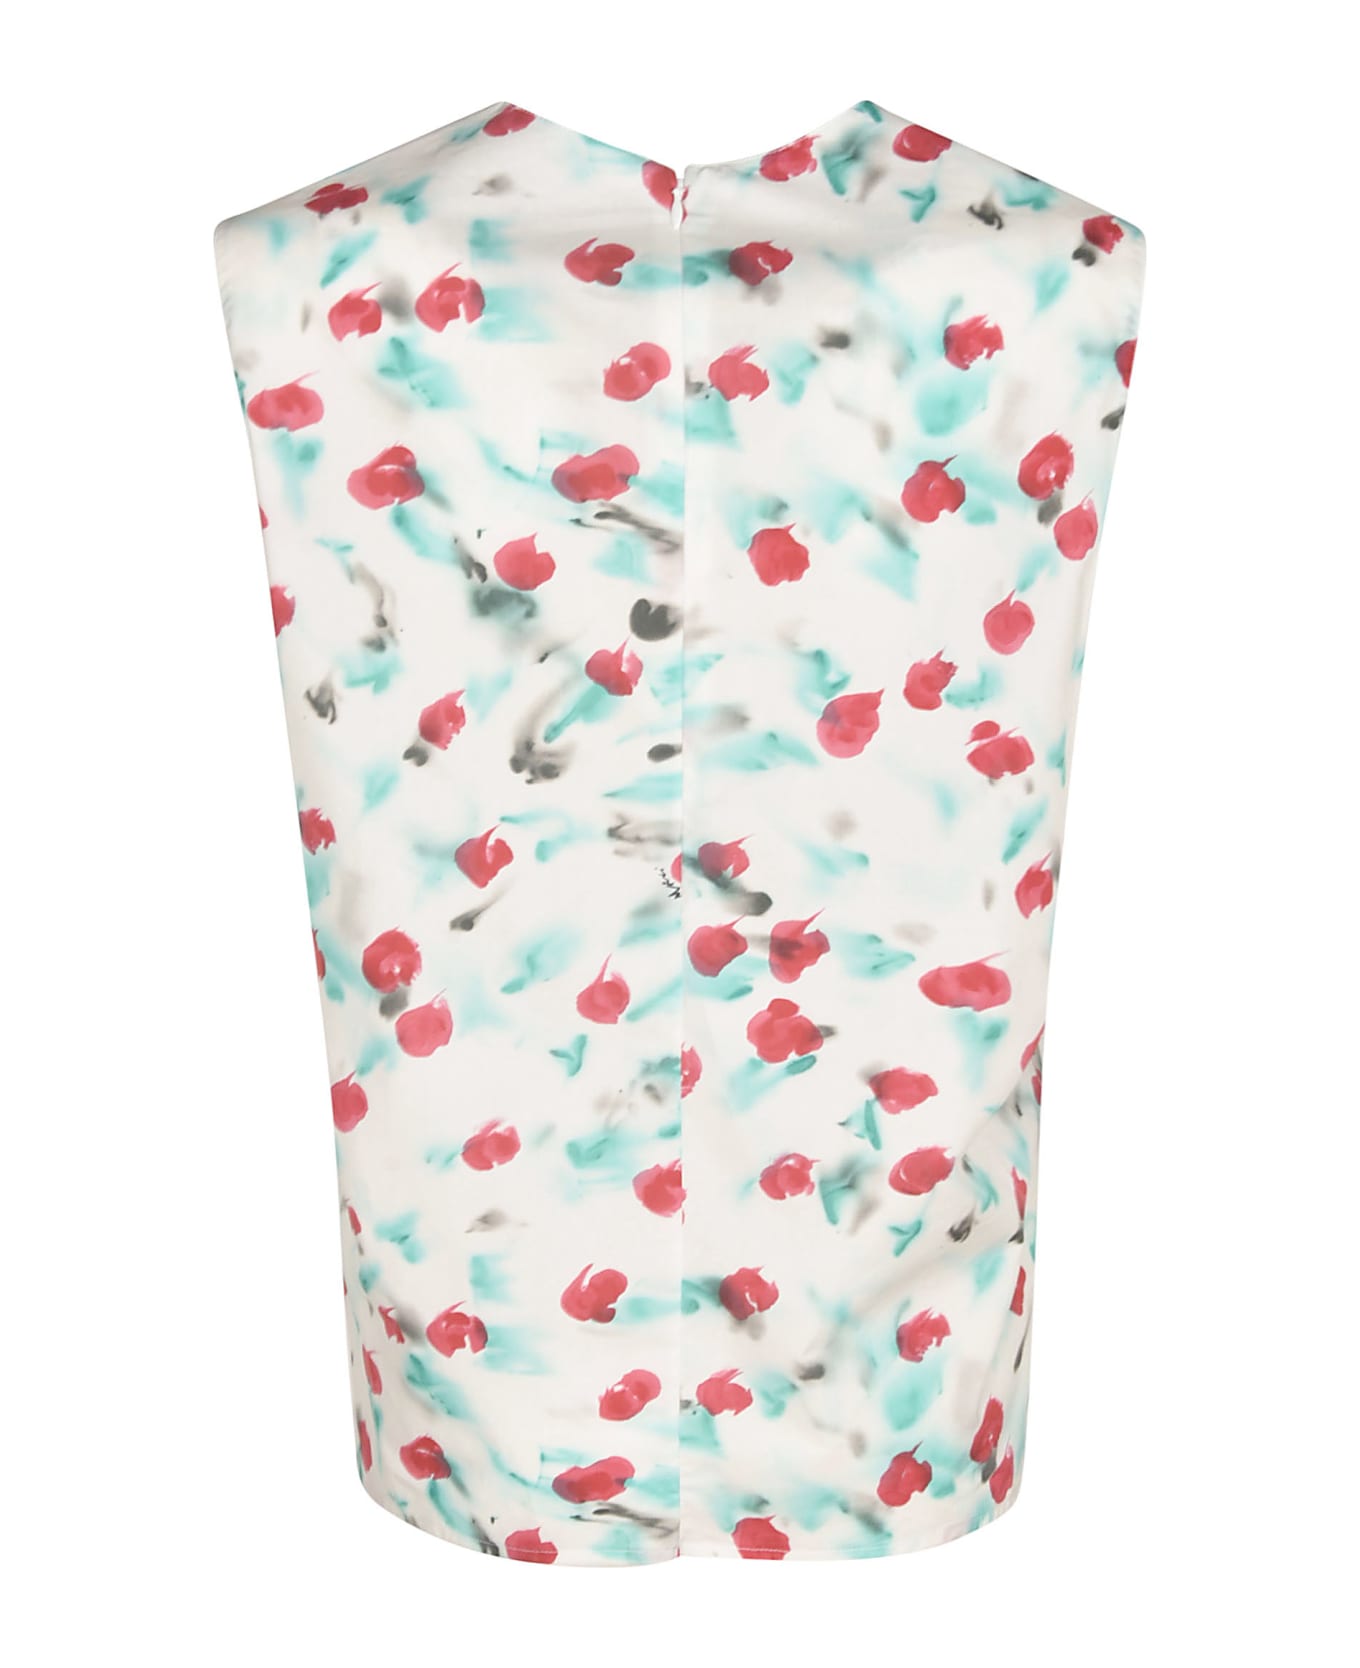 Marni Printed Sleeveless Top - Lily White/Multicolor